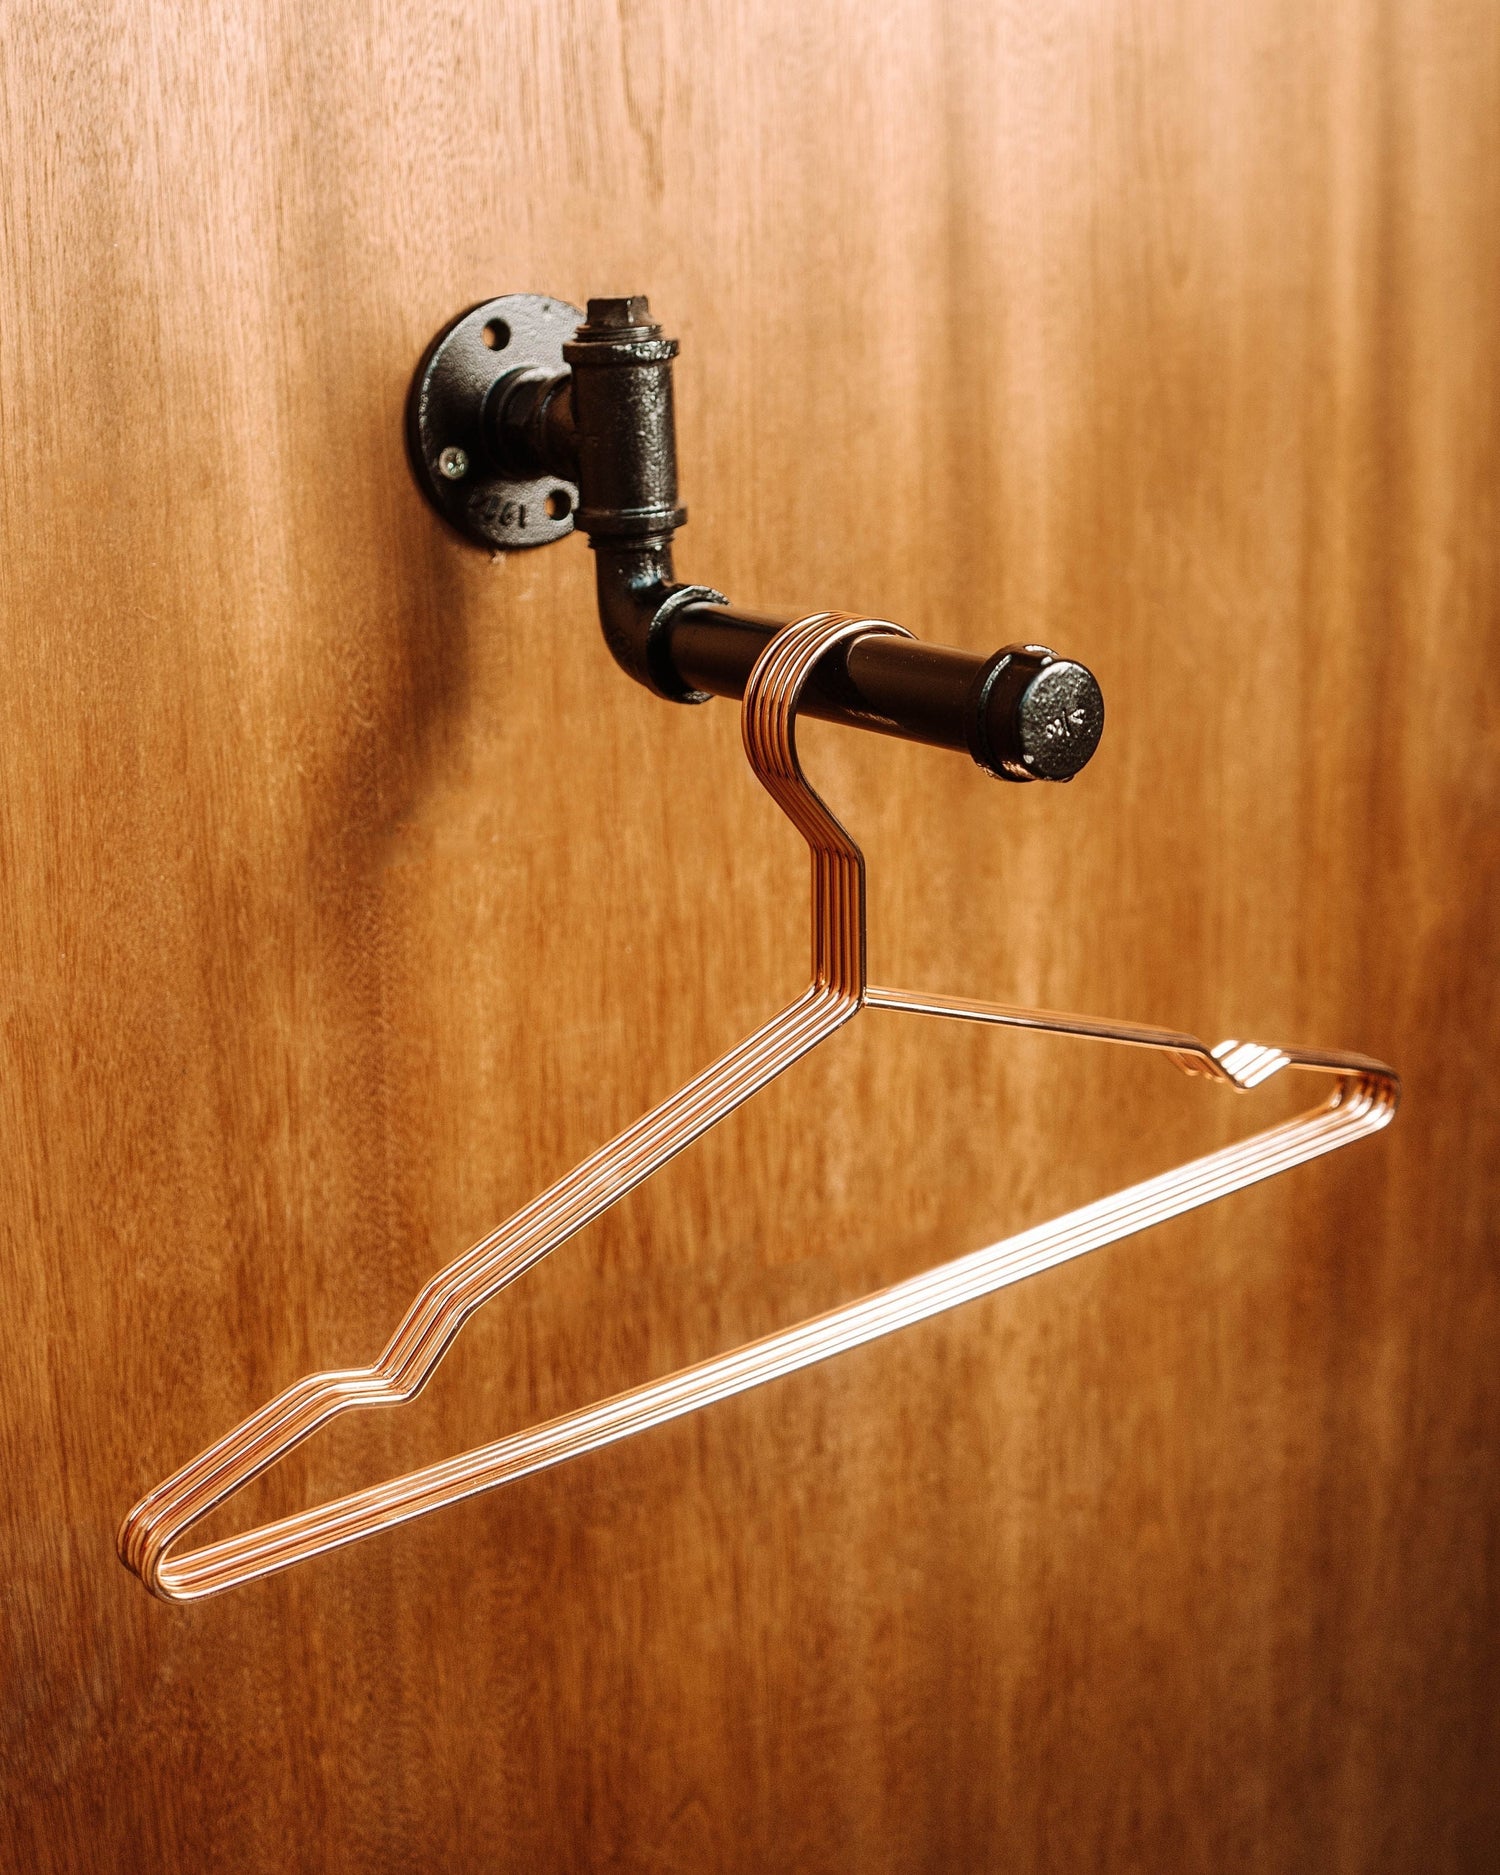 A modern Clothes Rail Wall Mount with hanging garments, offering a space-efficient and stylish way to organize clothing.